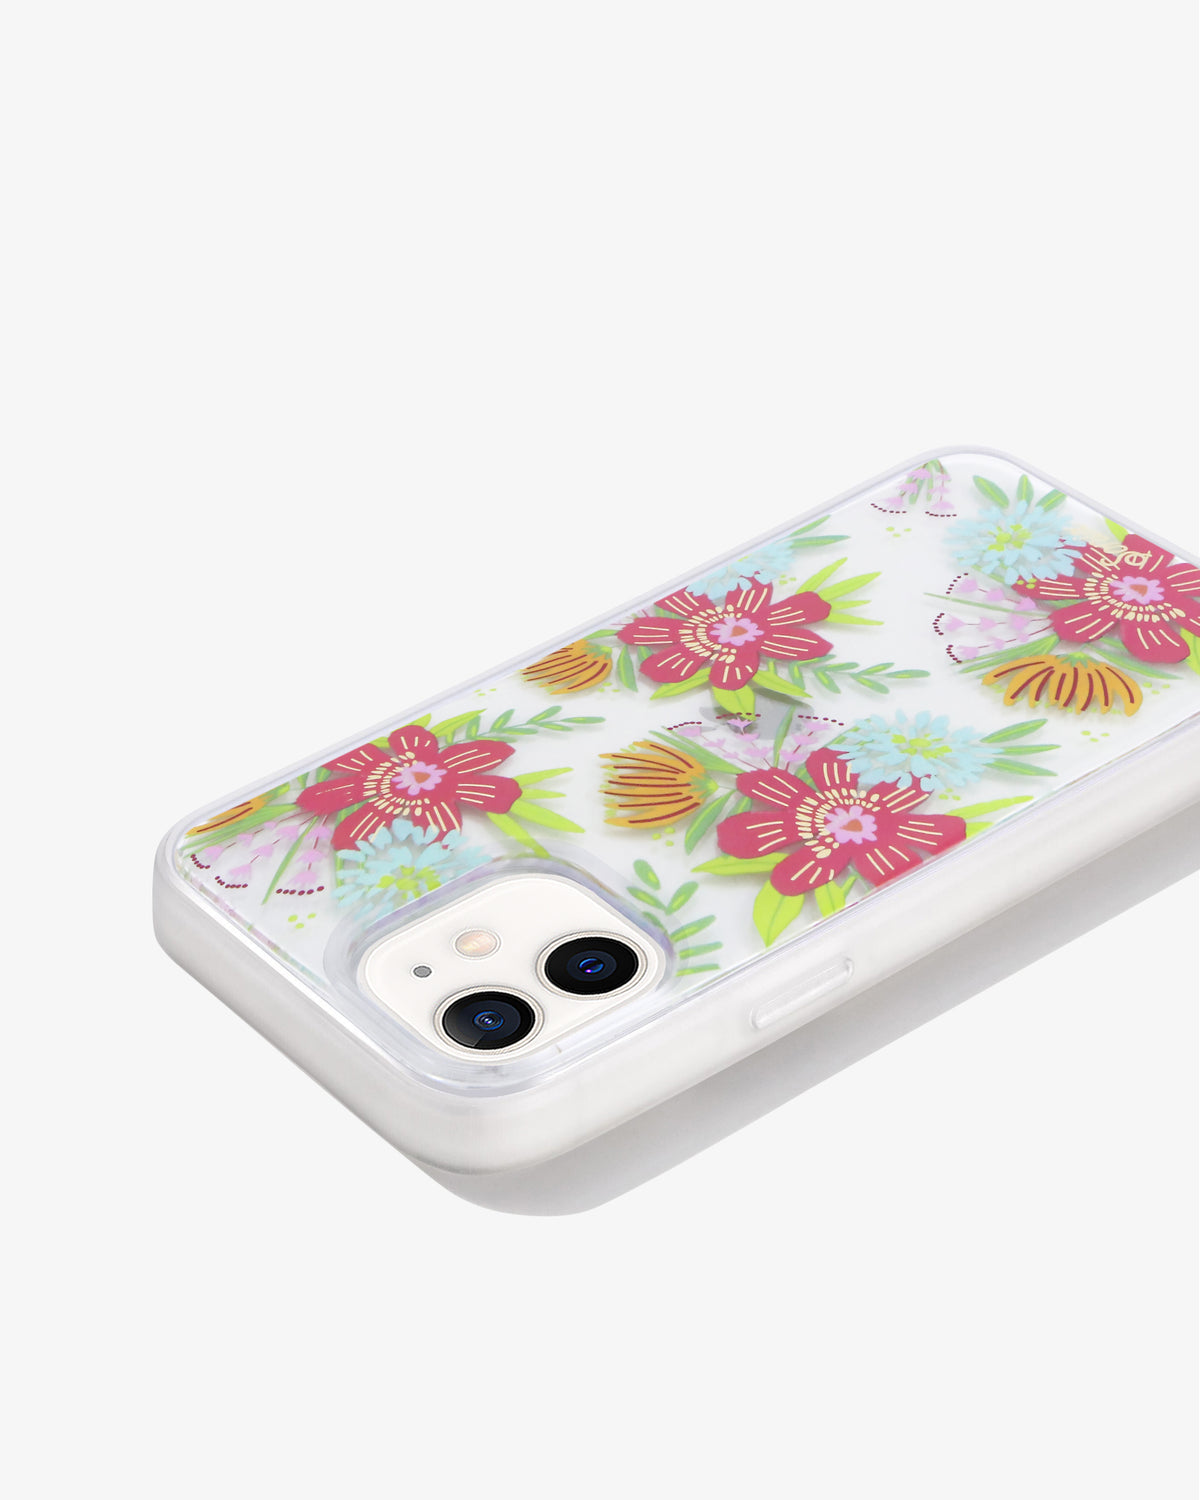 Wildflower - Apple Airpod Max Case Cover